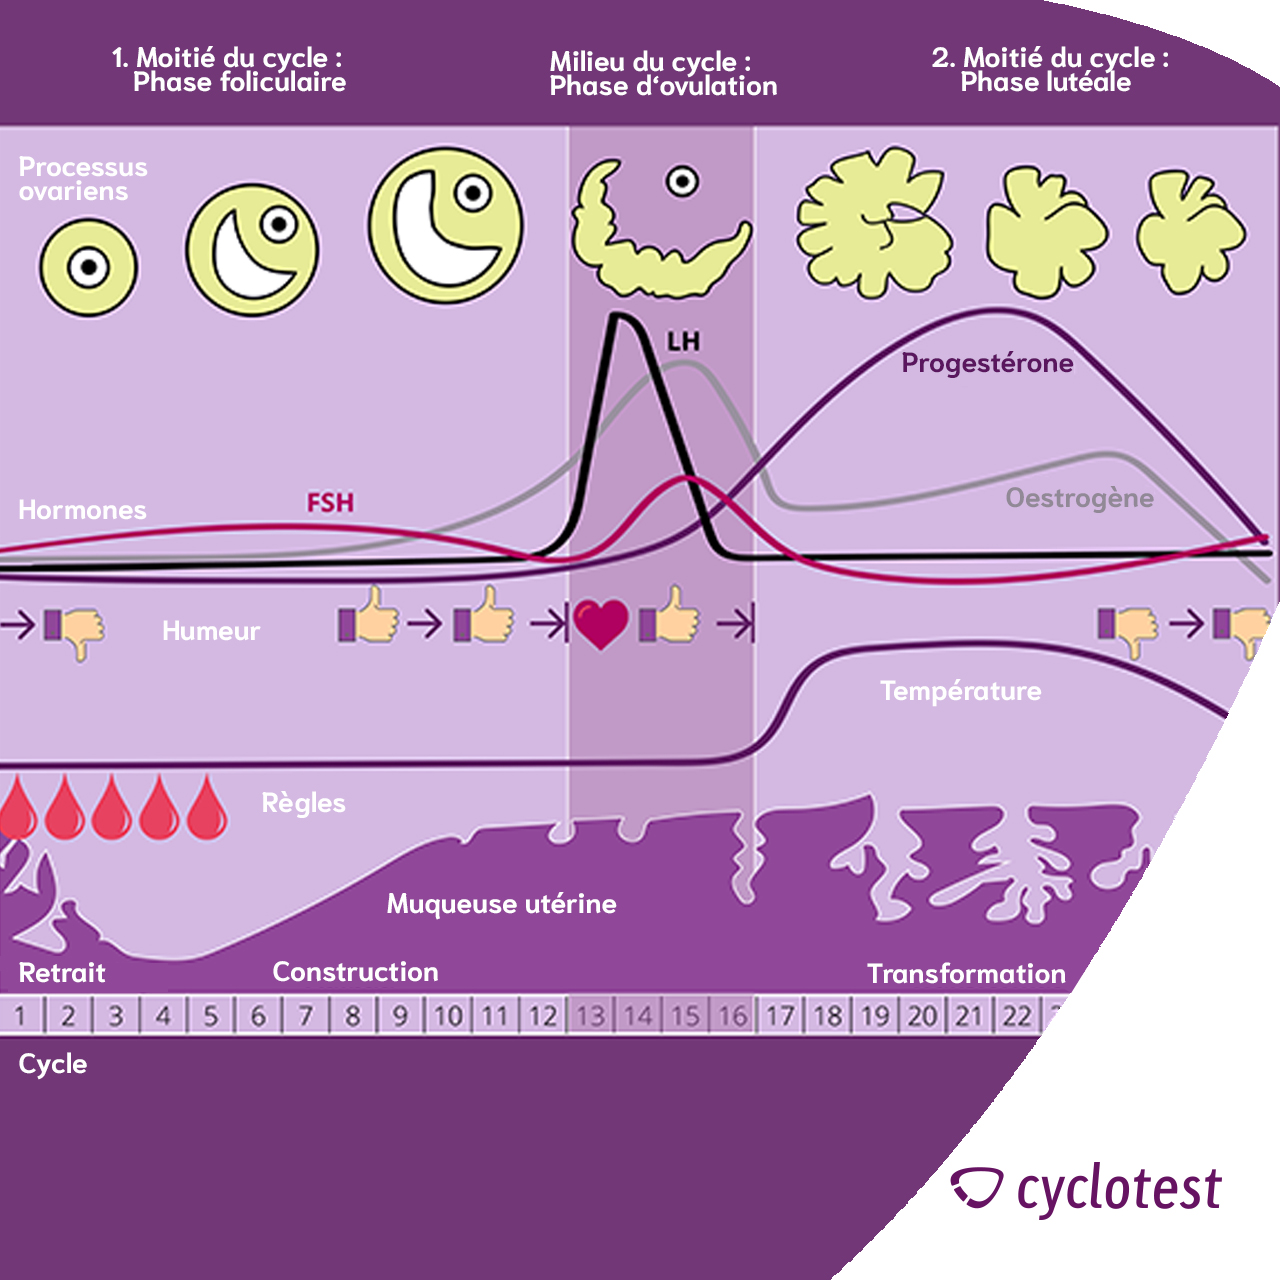 Phases du cycle féminin | Graphique : © cyclotest